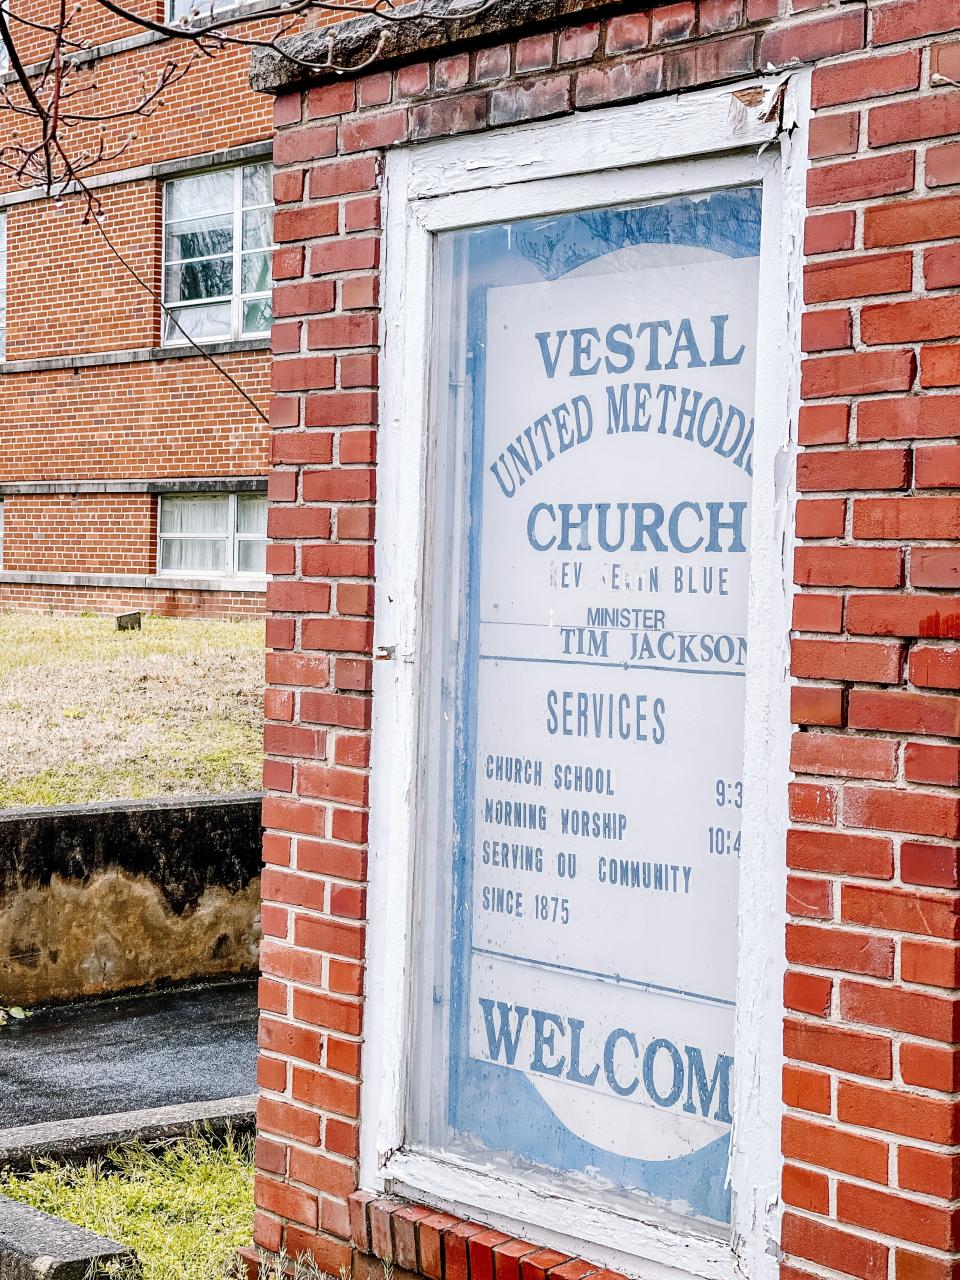 Pastor Tim Jackson has been tasked with reopening the Vestal United Methodist Church. After months of hard work, the first service will be held on Easter Sunday. March 16, 2022.